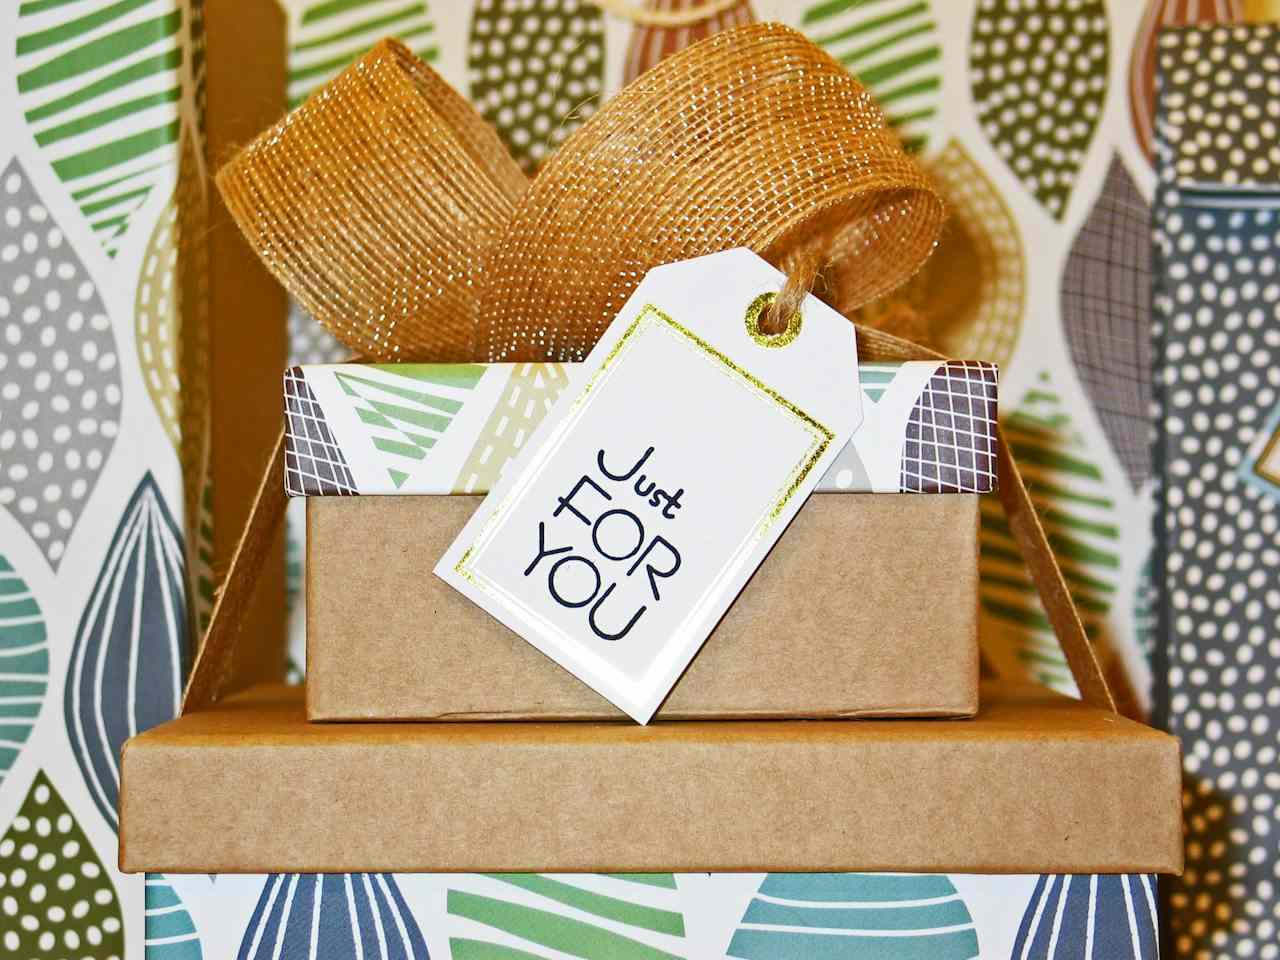 A gift box with a tag that says "just for you".